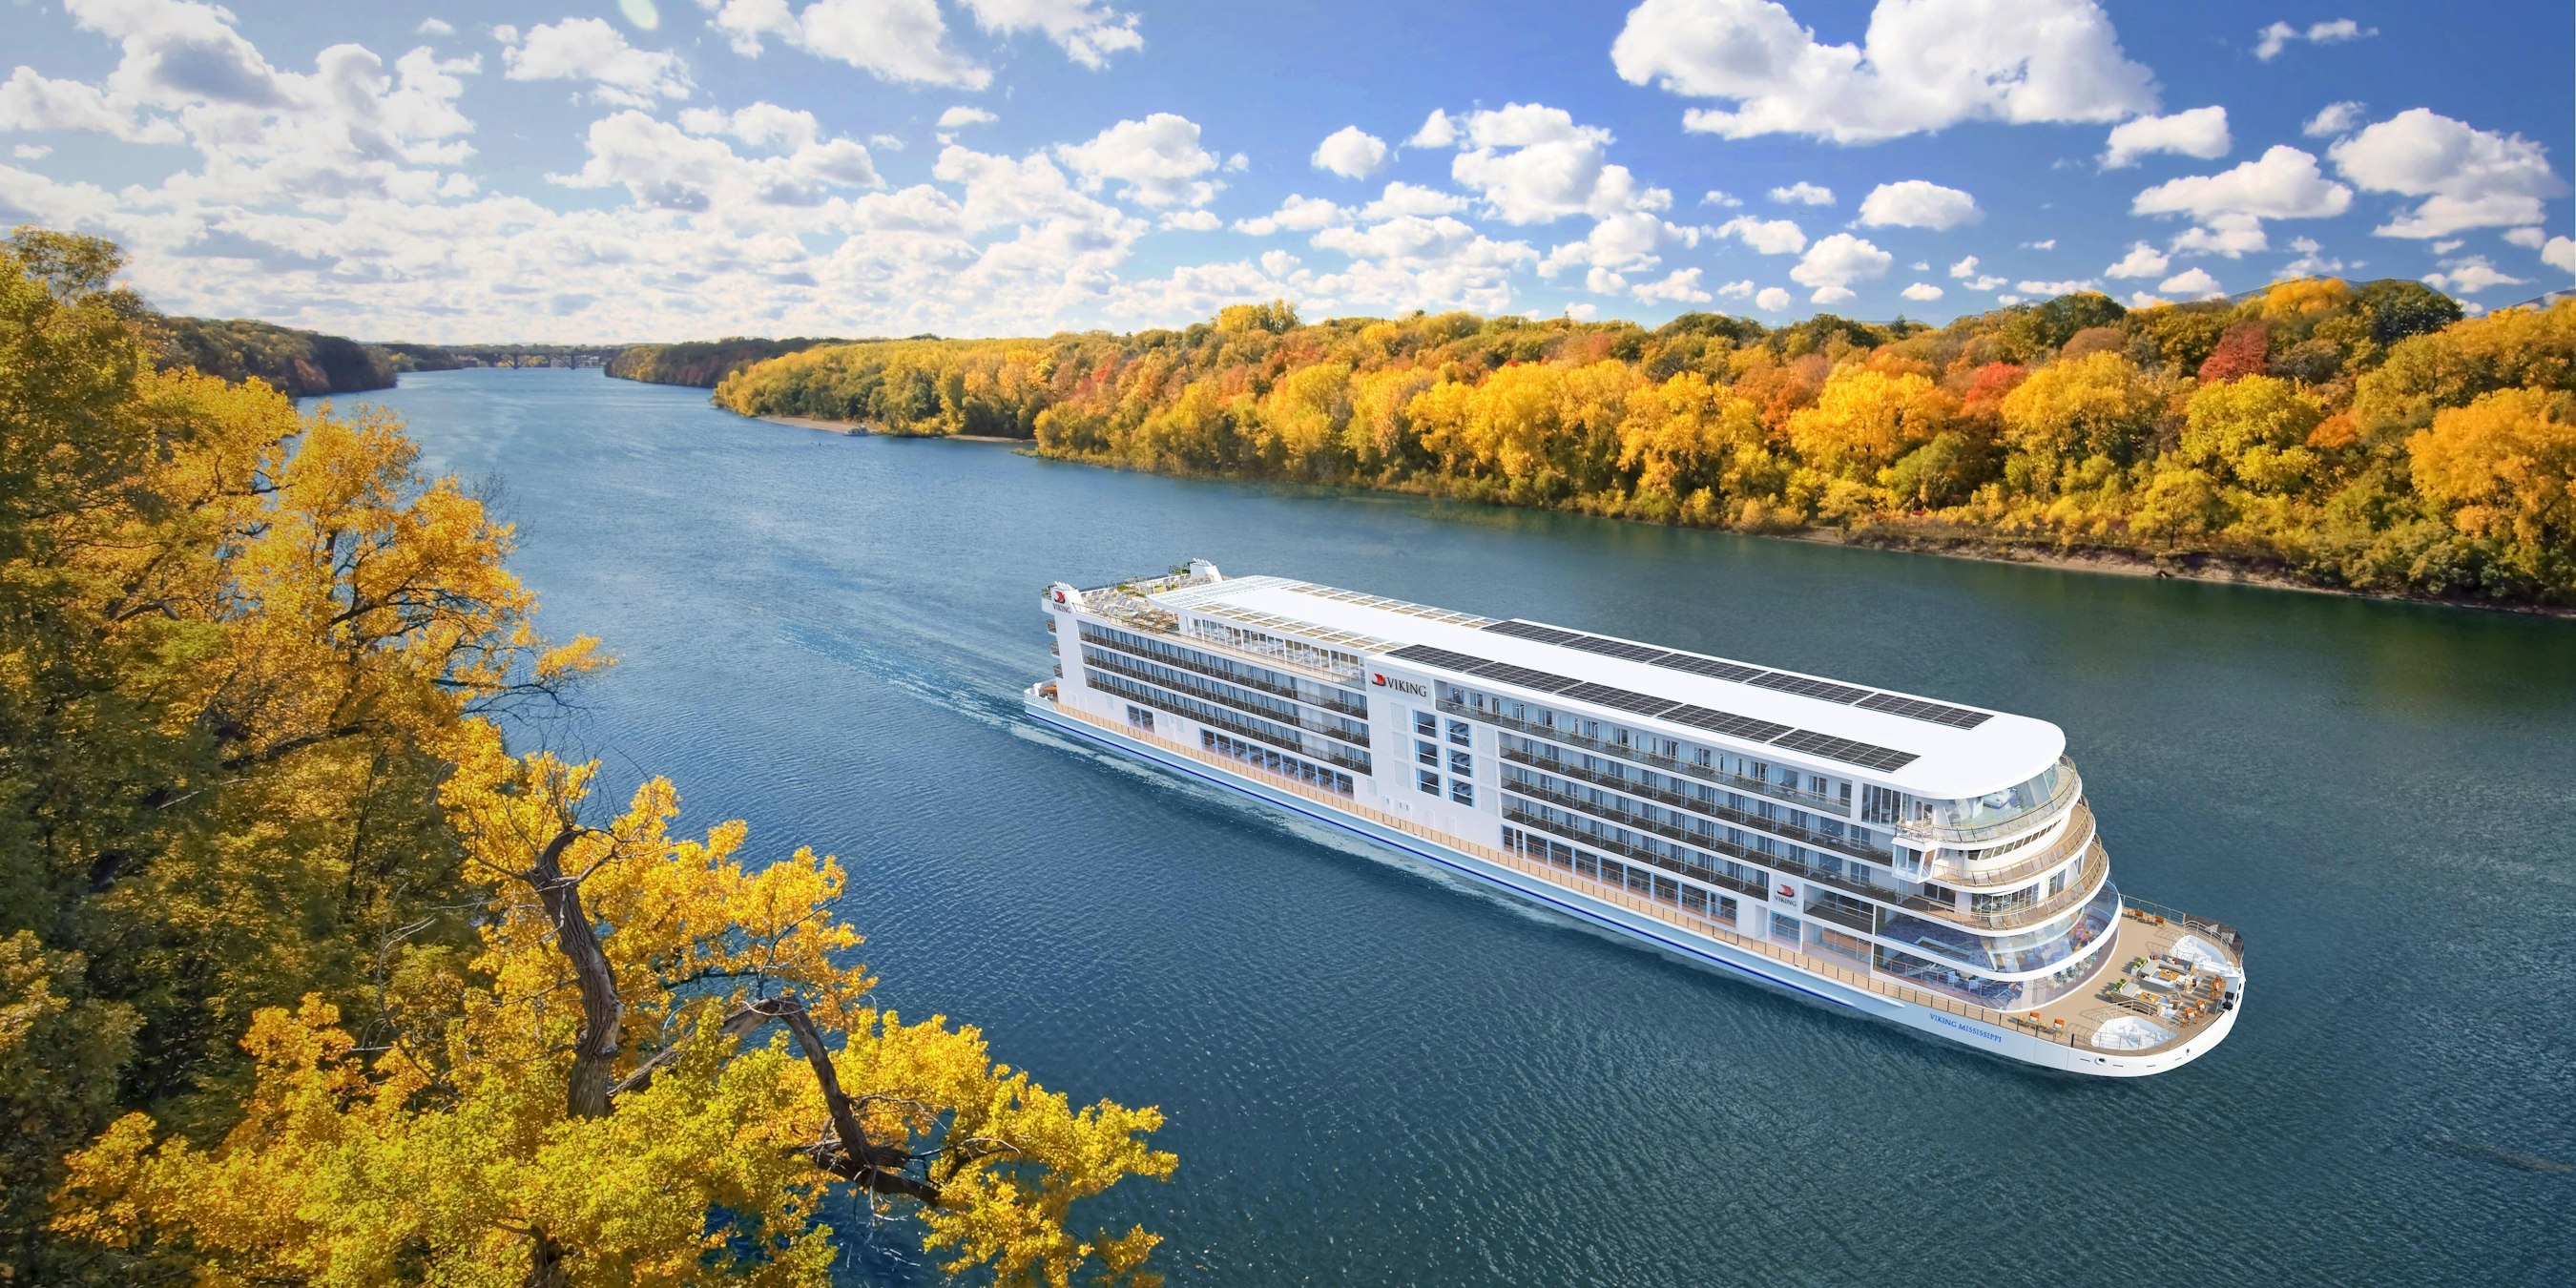 Viking Announces First Ship And Cruises On The Mississippi River For 2022